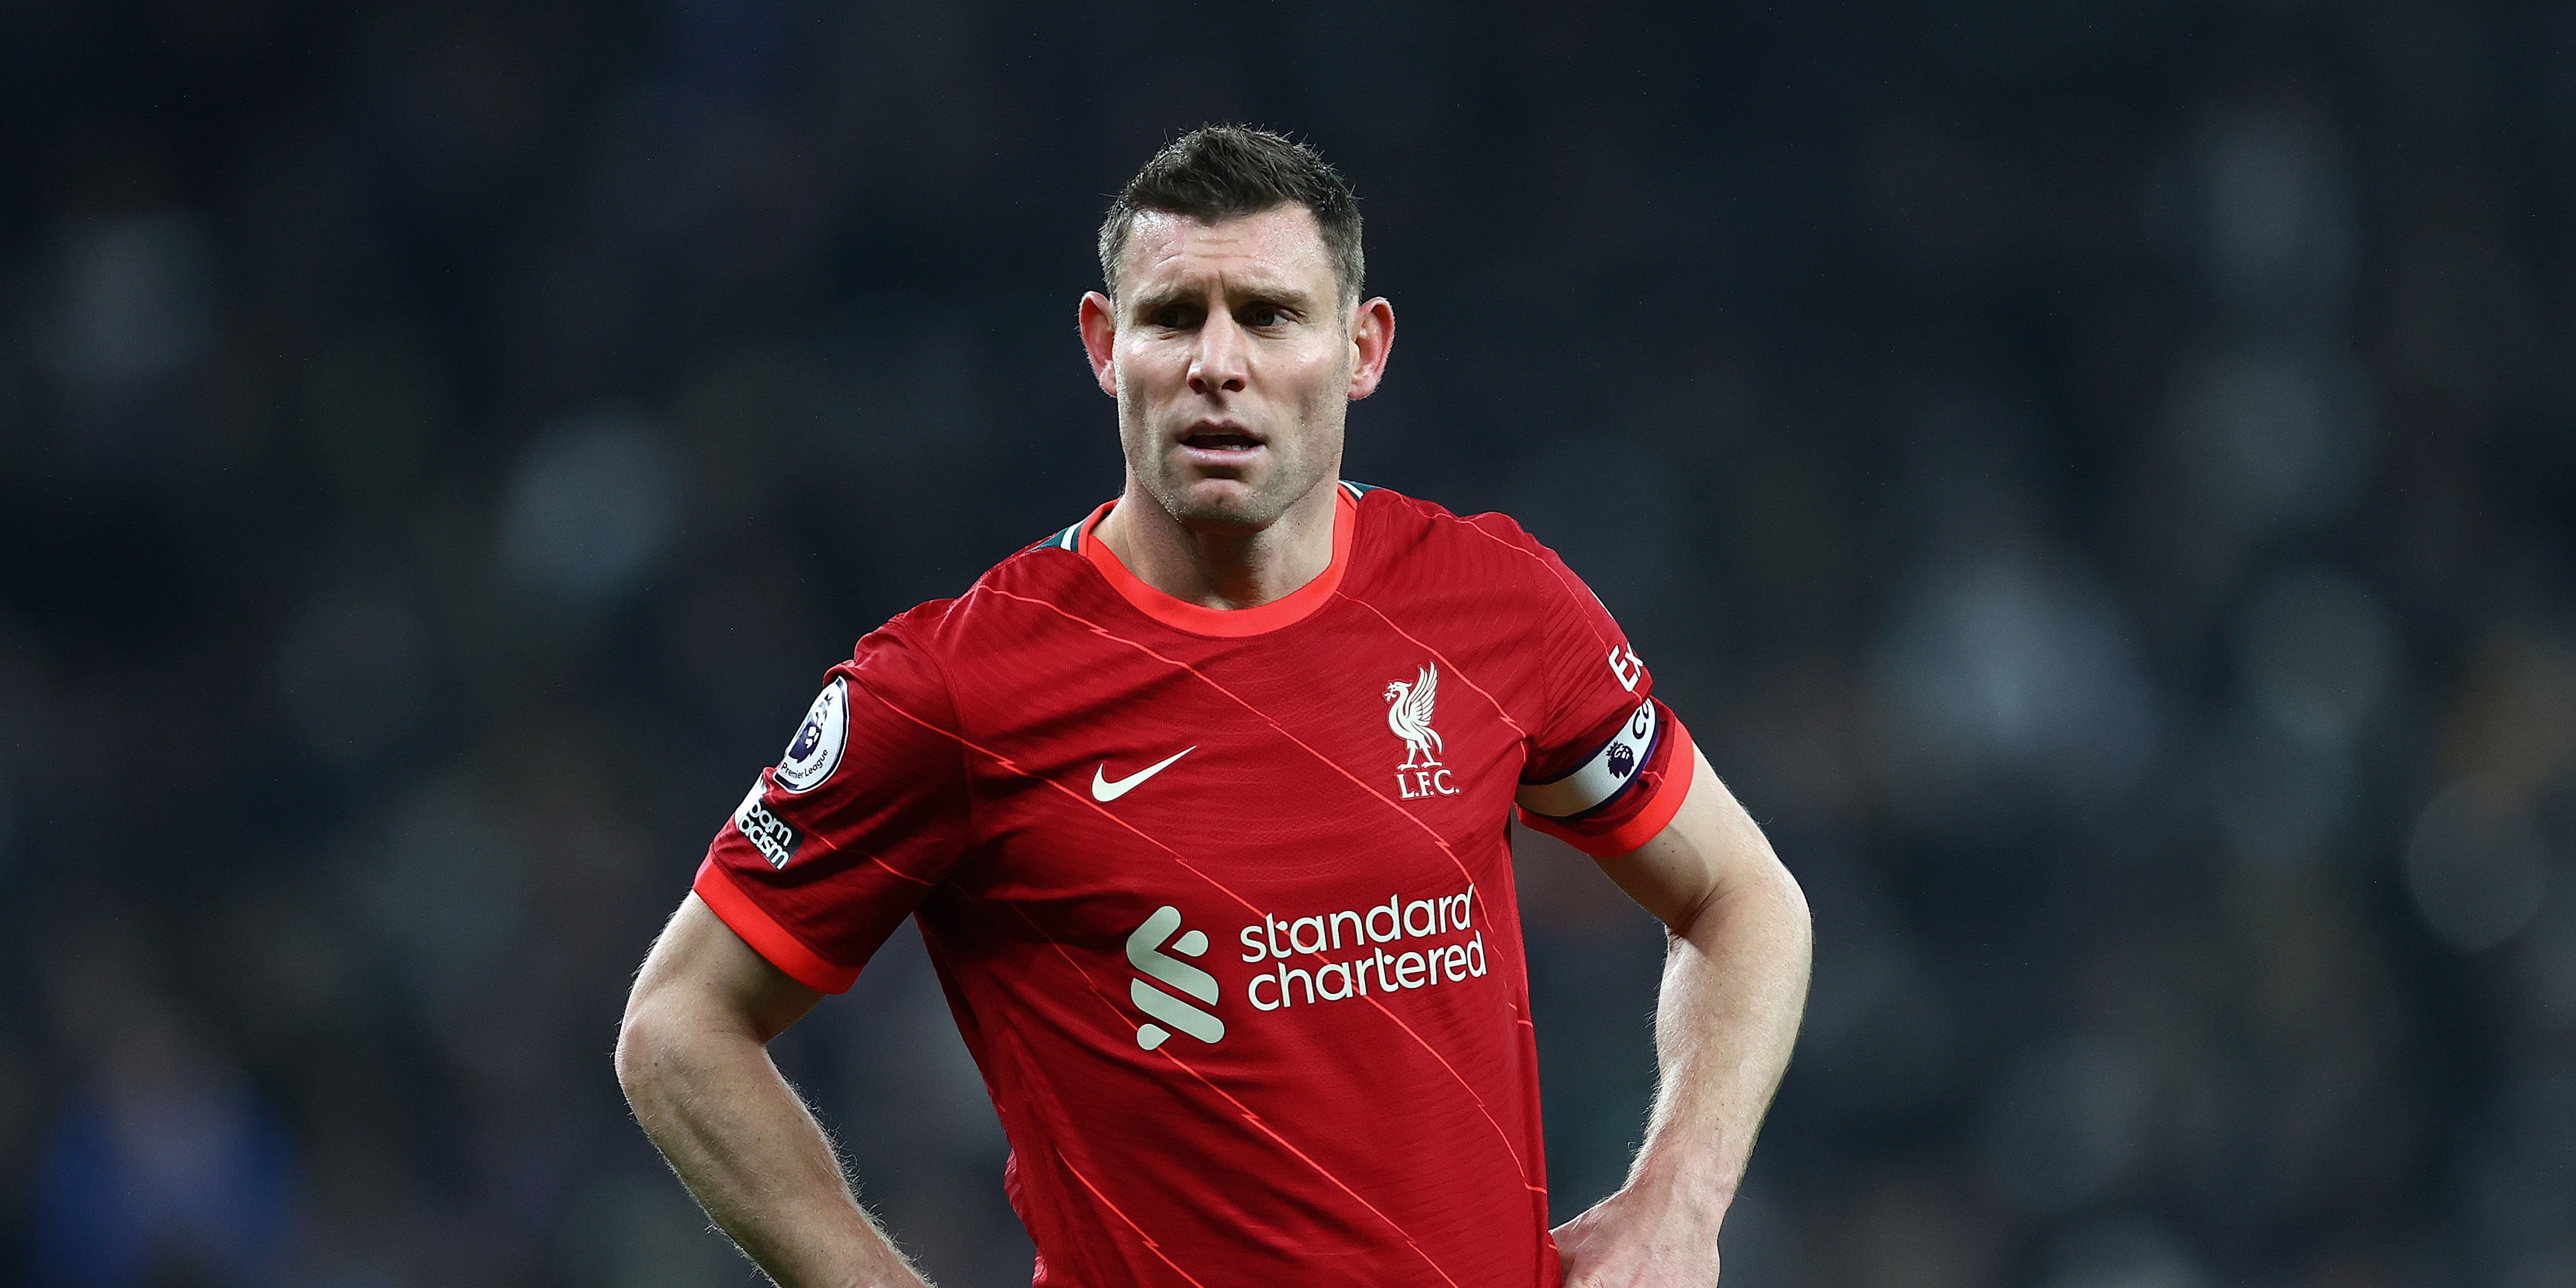 (Video) Milner revisits stunned reaction to Mane assist with hilarious online caption